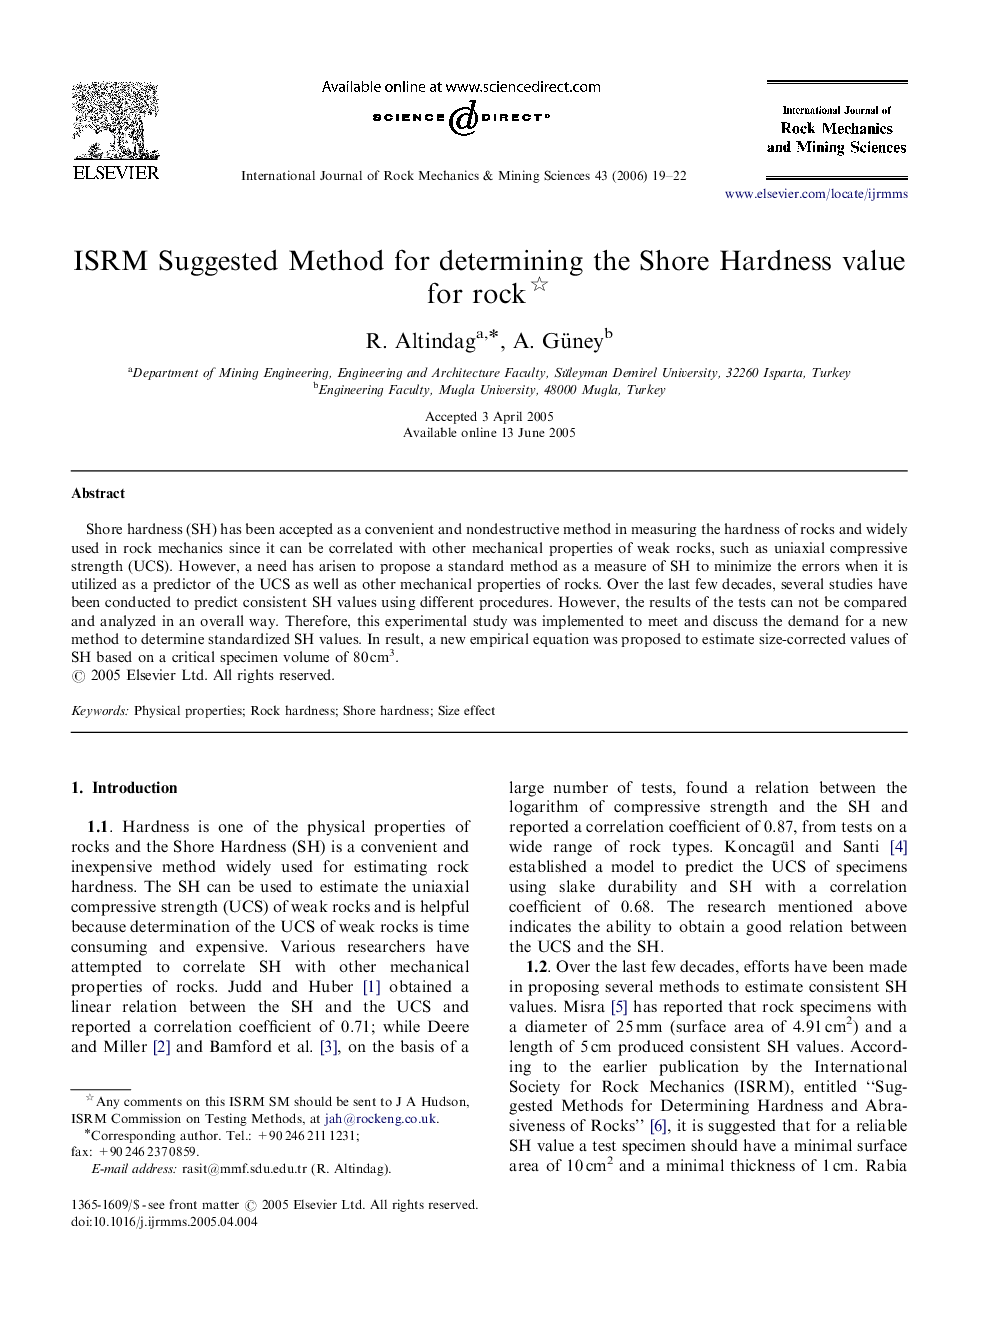 ISRM Suggested Method for determining the Shore Hardness value for rock 